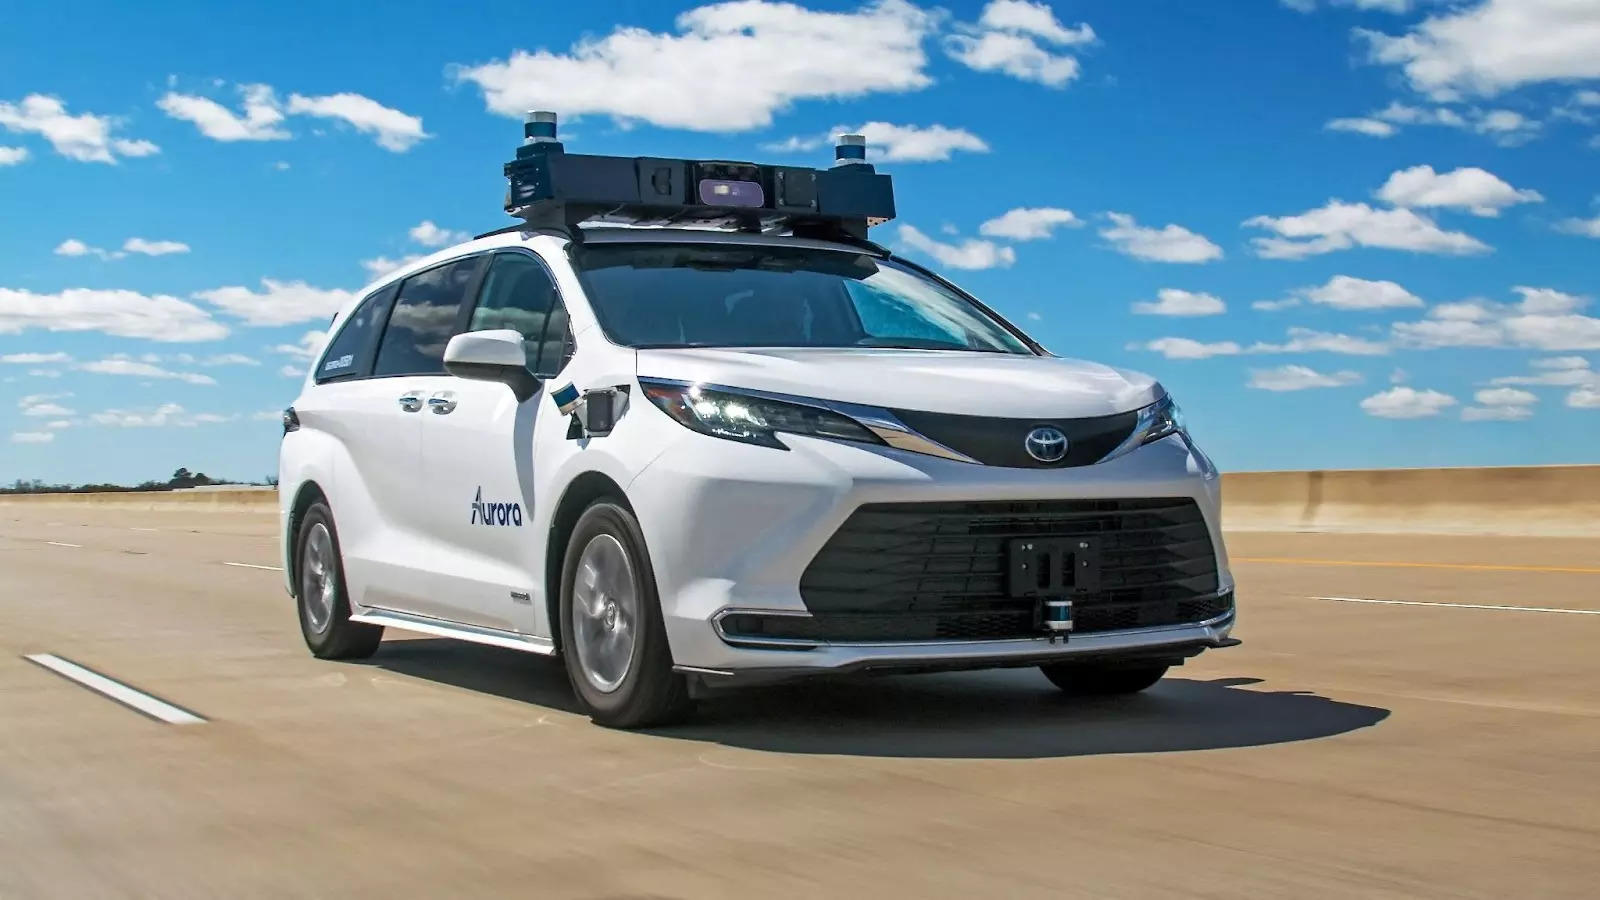  Autonomous vehicle startups are under pressure to generate meaningful revenue from billions of dollars of engineering investment, but scaling up the fleet is a challenge as technological hurdles remain.